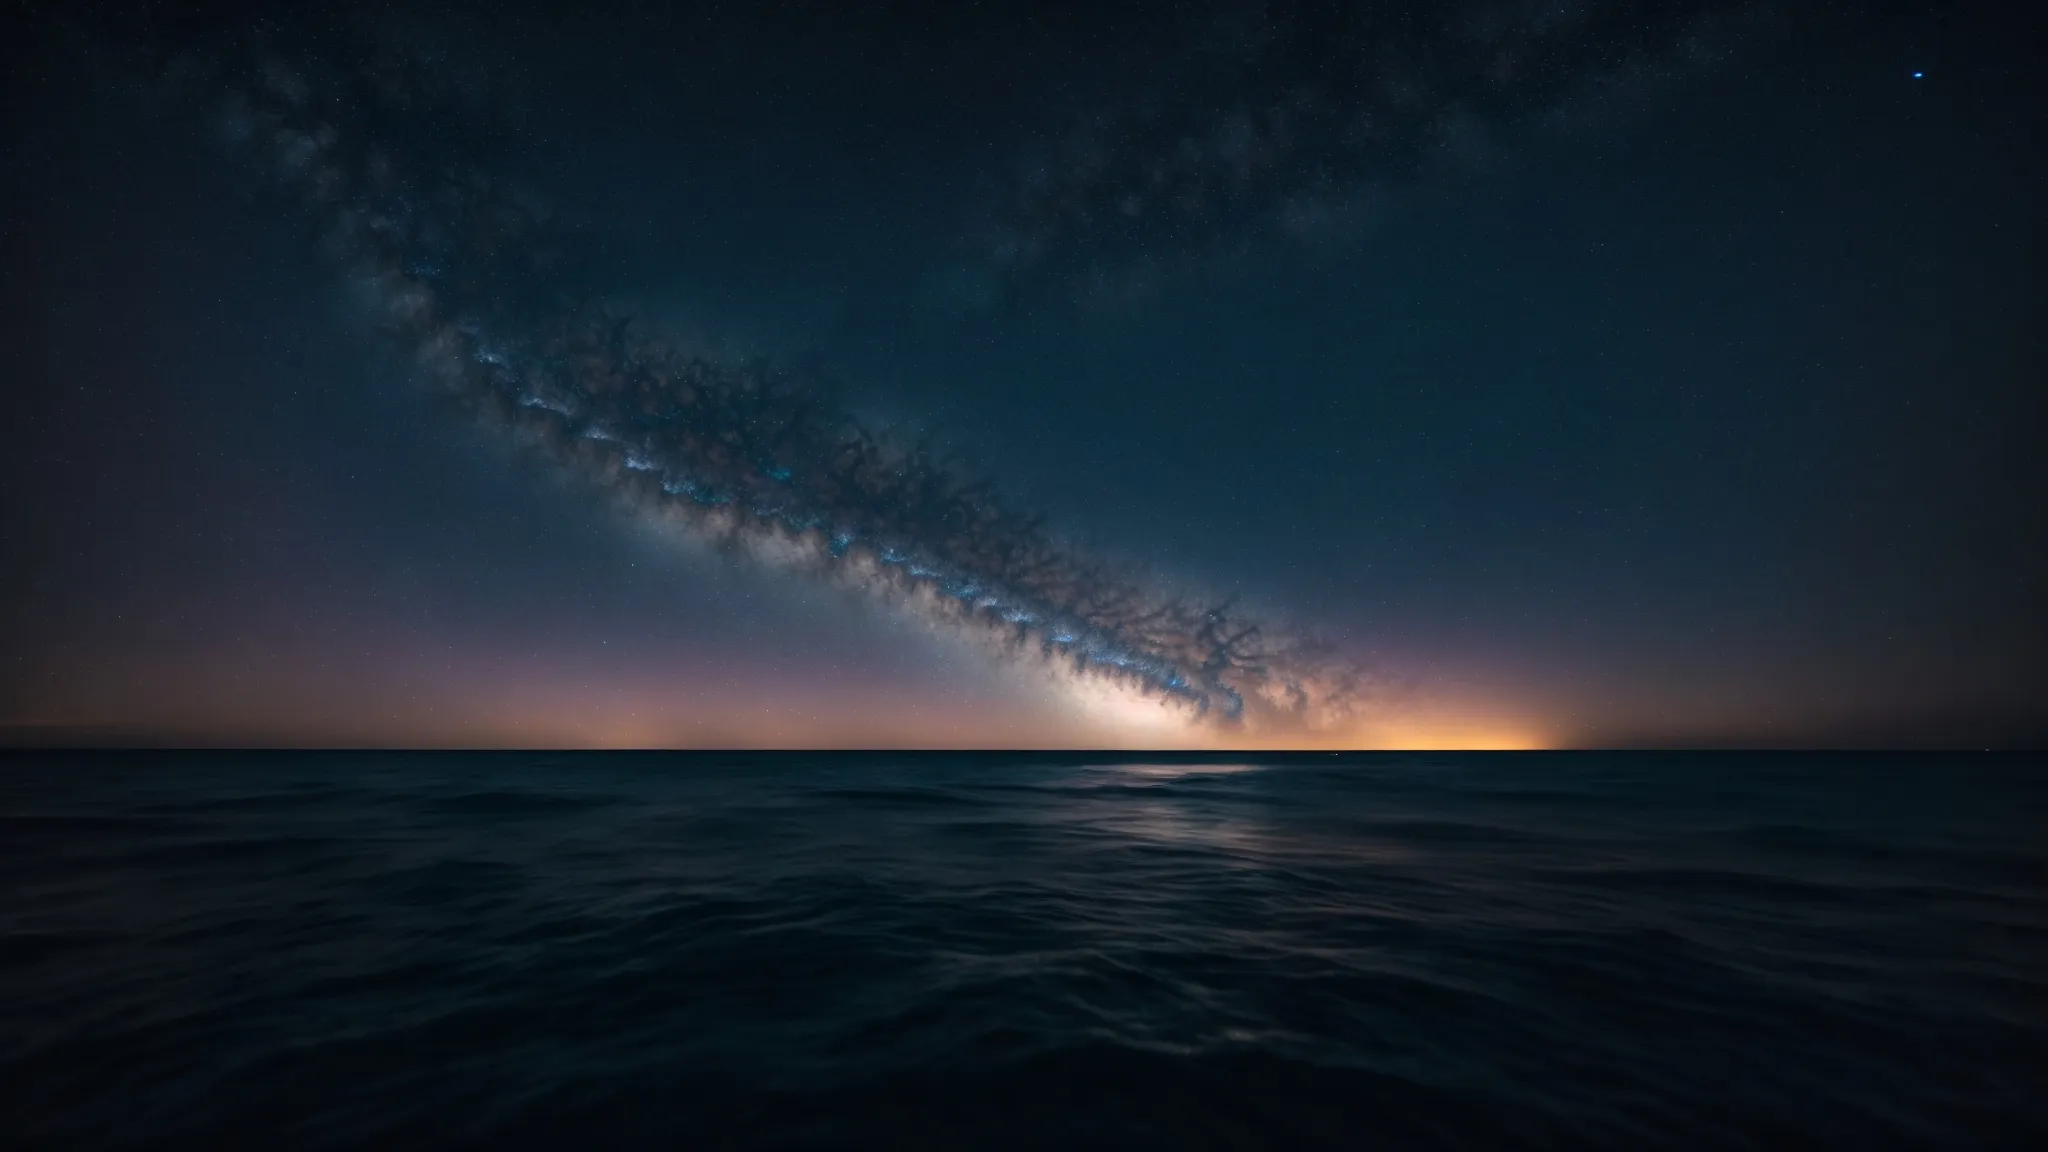 a vast ocean illuminated by digital signals under a starry sky, representing endless possibilities in the digital world.